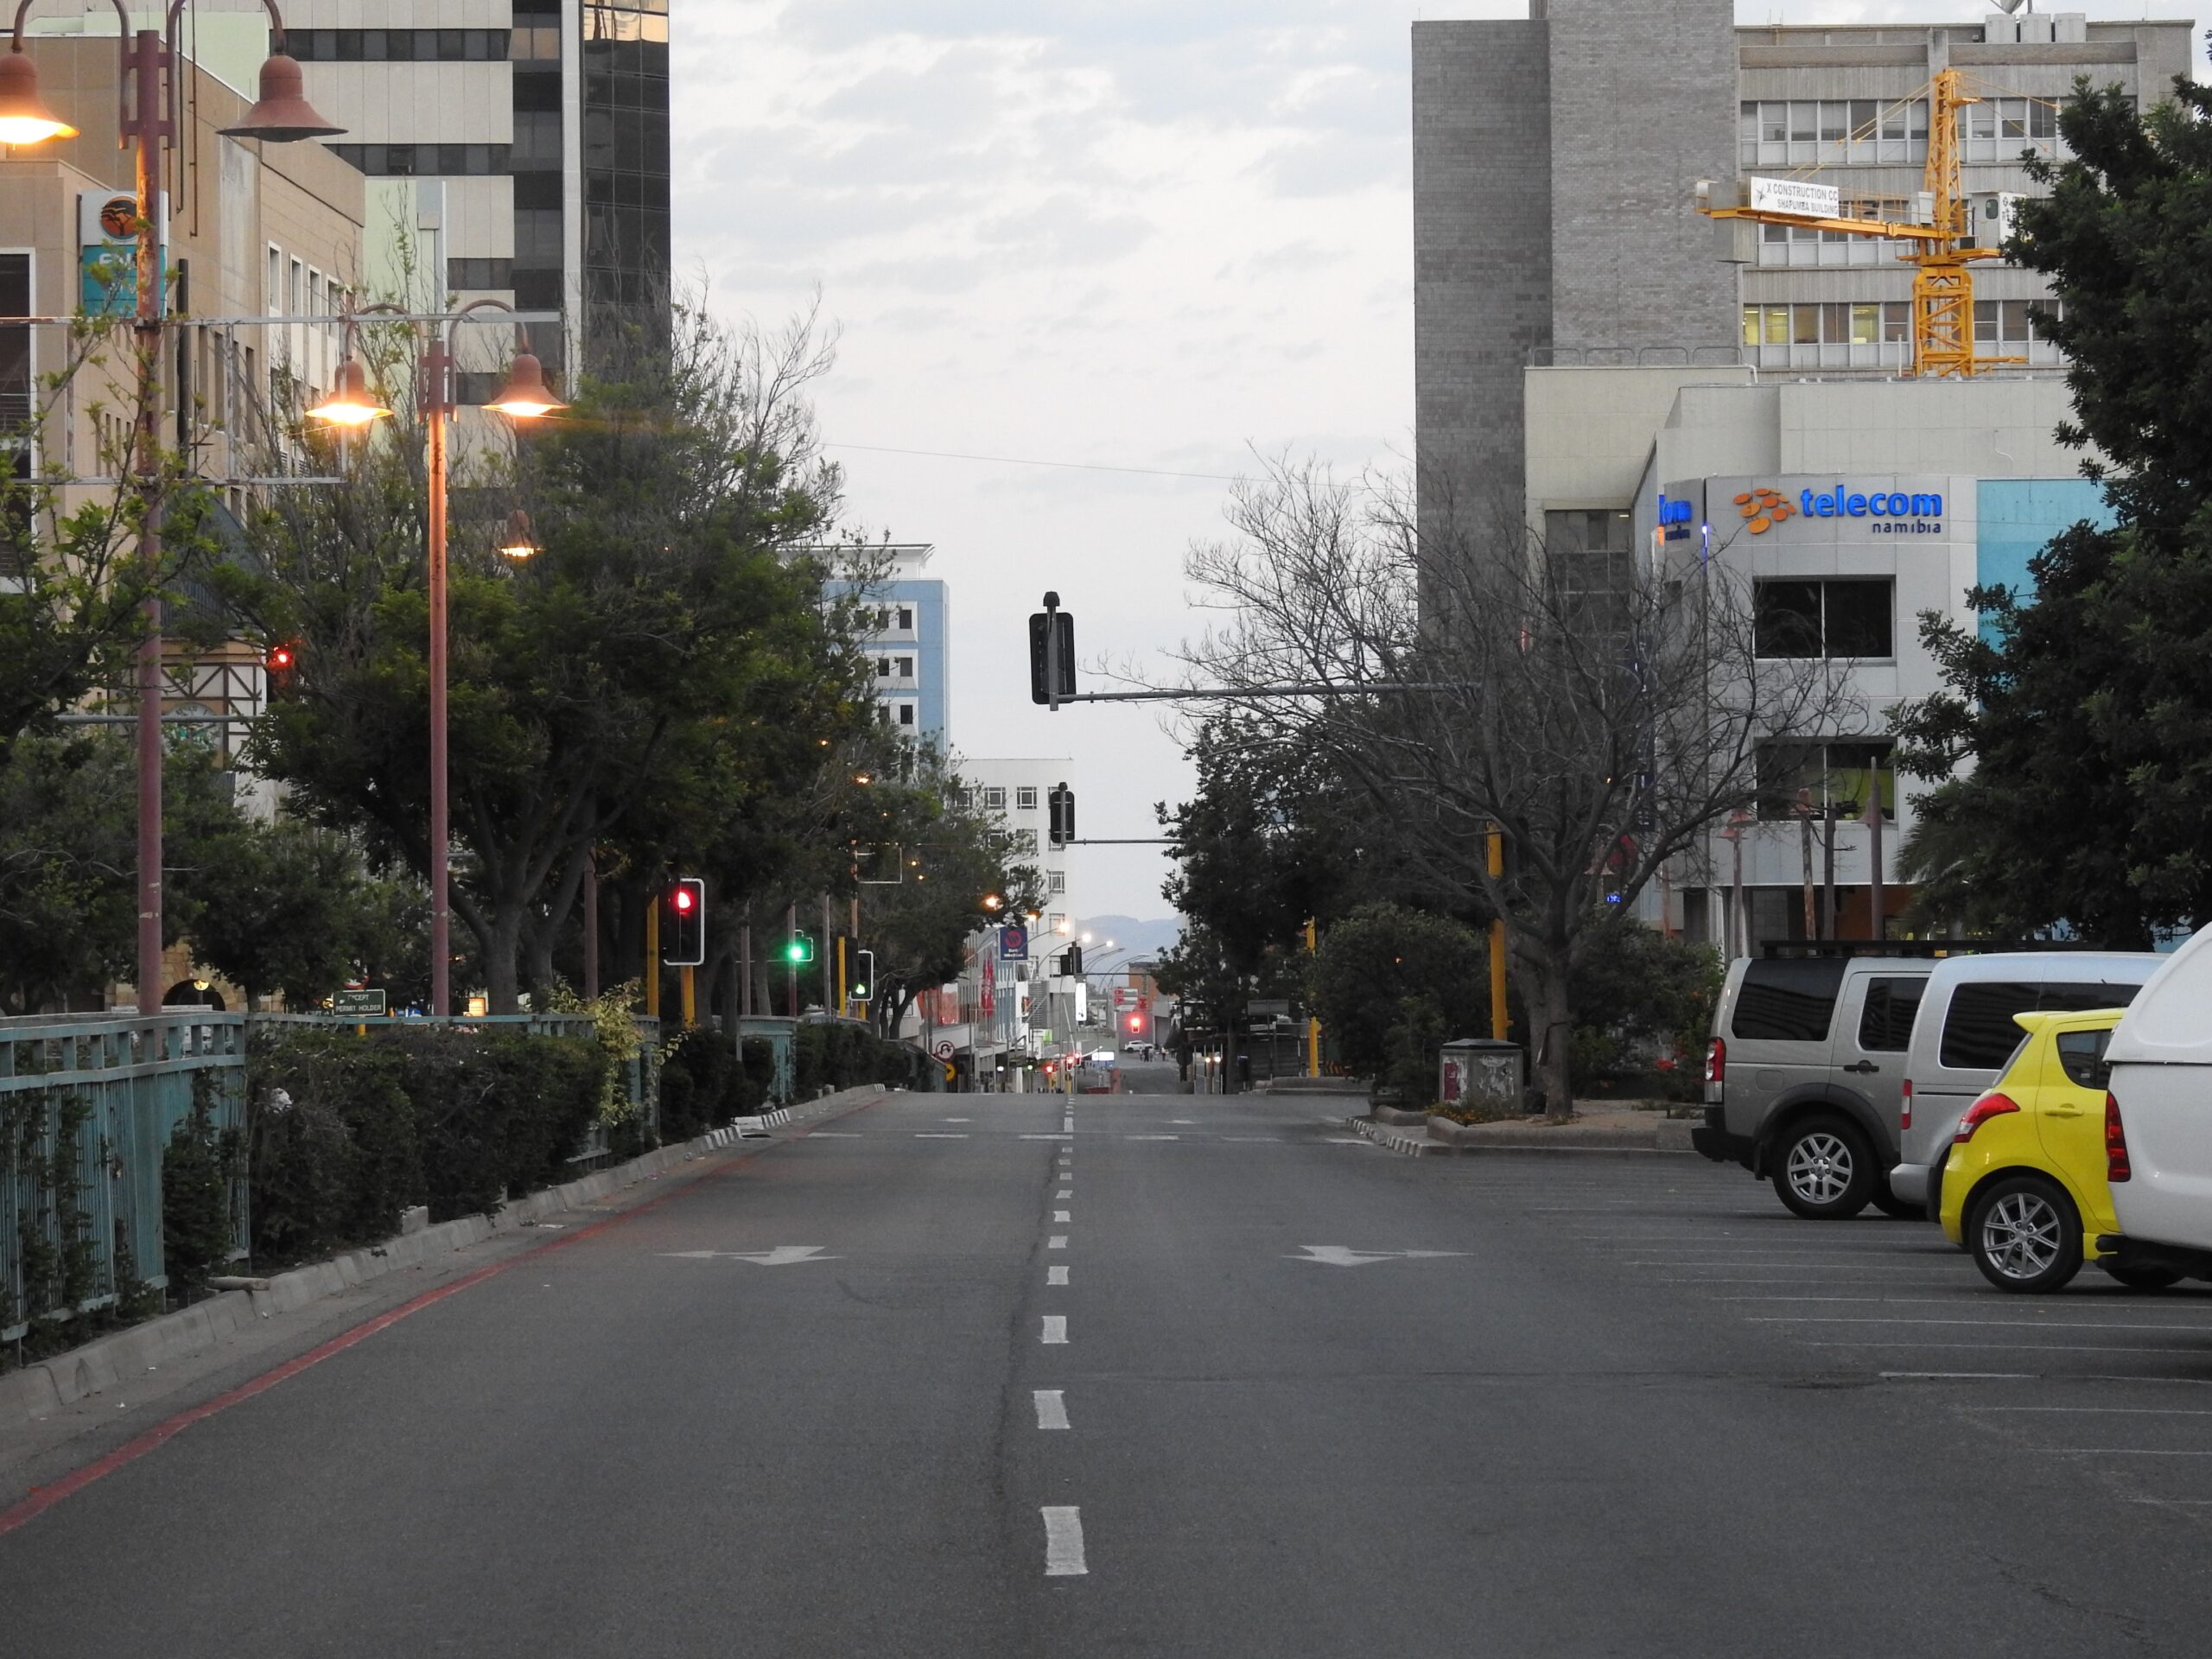 A street with cars in Windhoek, Namibia (Credit: Cornelius C. Campbell, Unsplash)